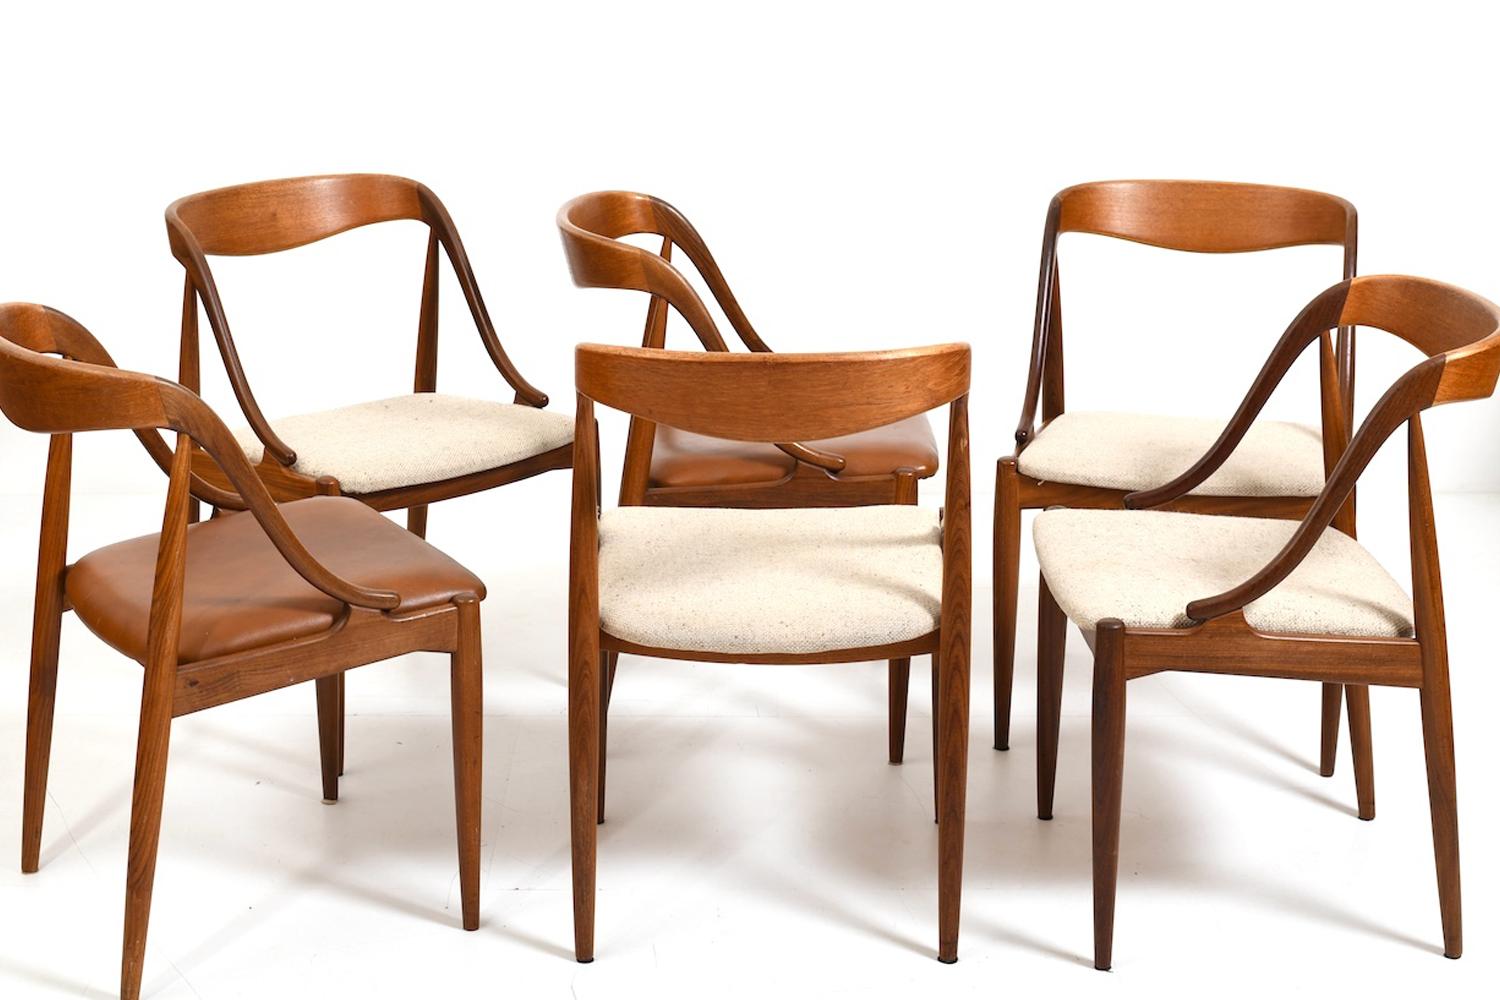 Teak Dining Chairs by Johannes Andersen 1960s For Sale 1